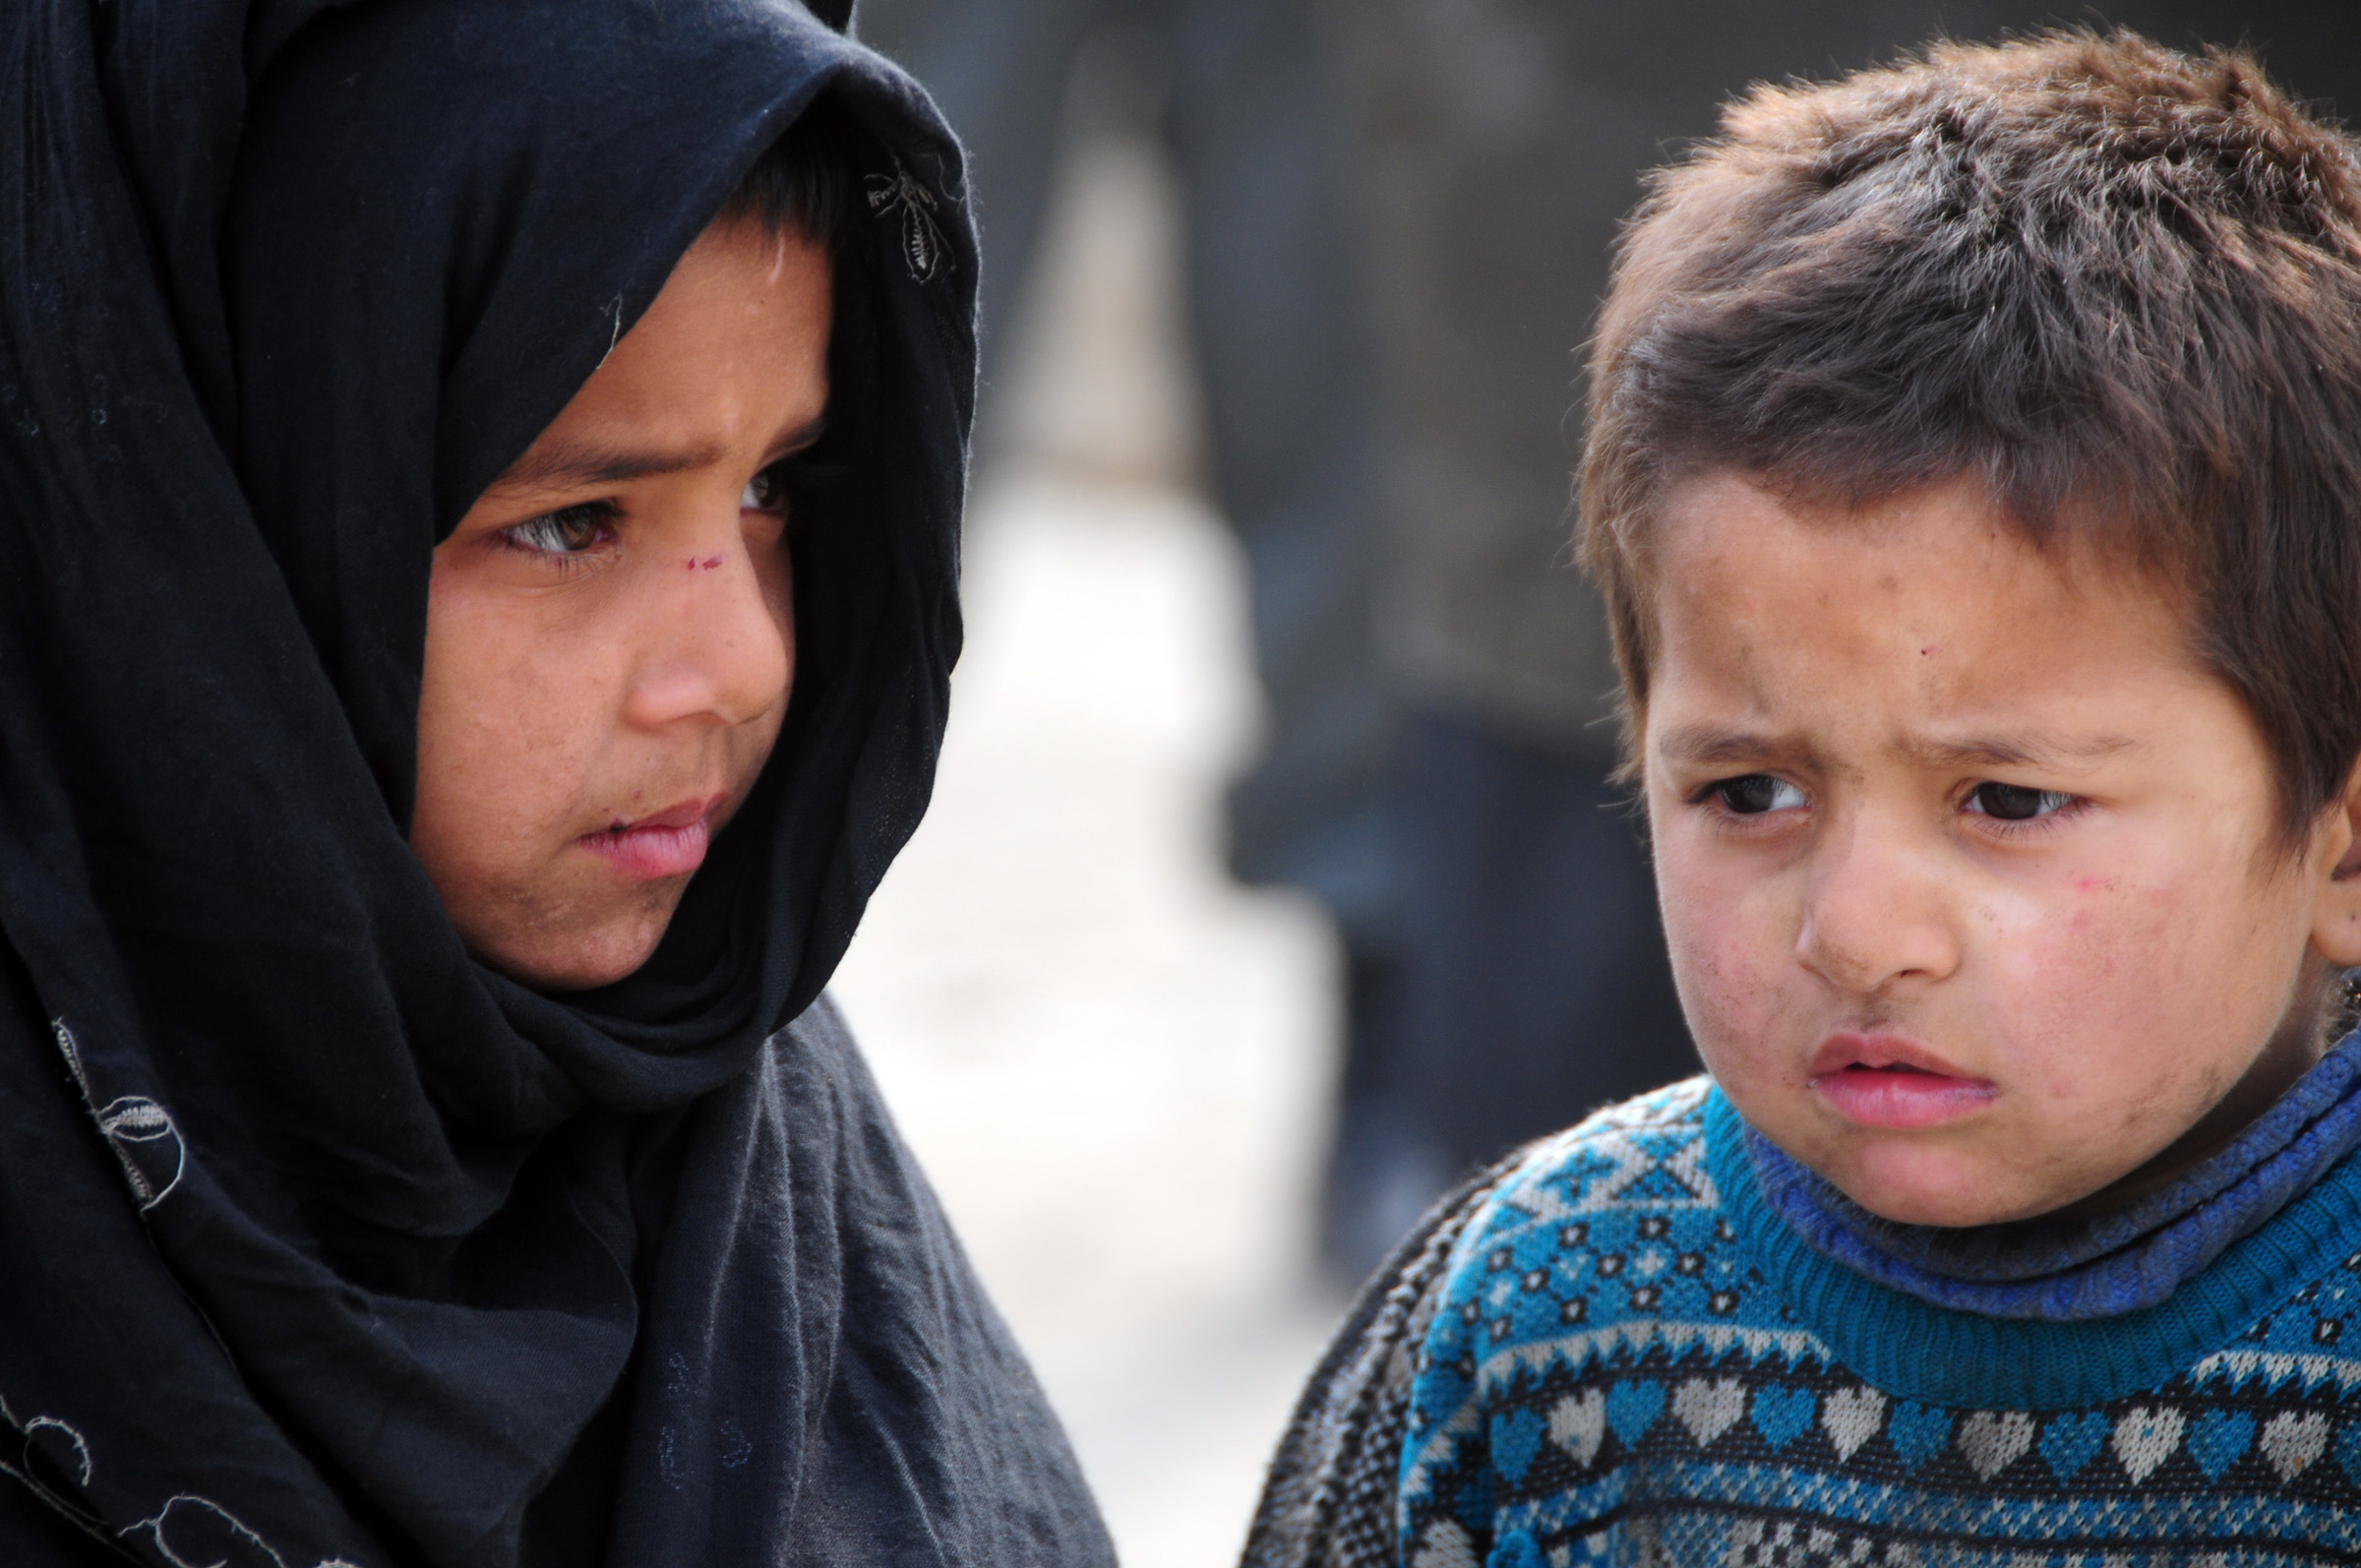 Afghan children show an expression of confusion (4297780903)